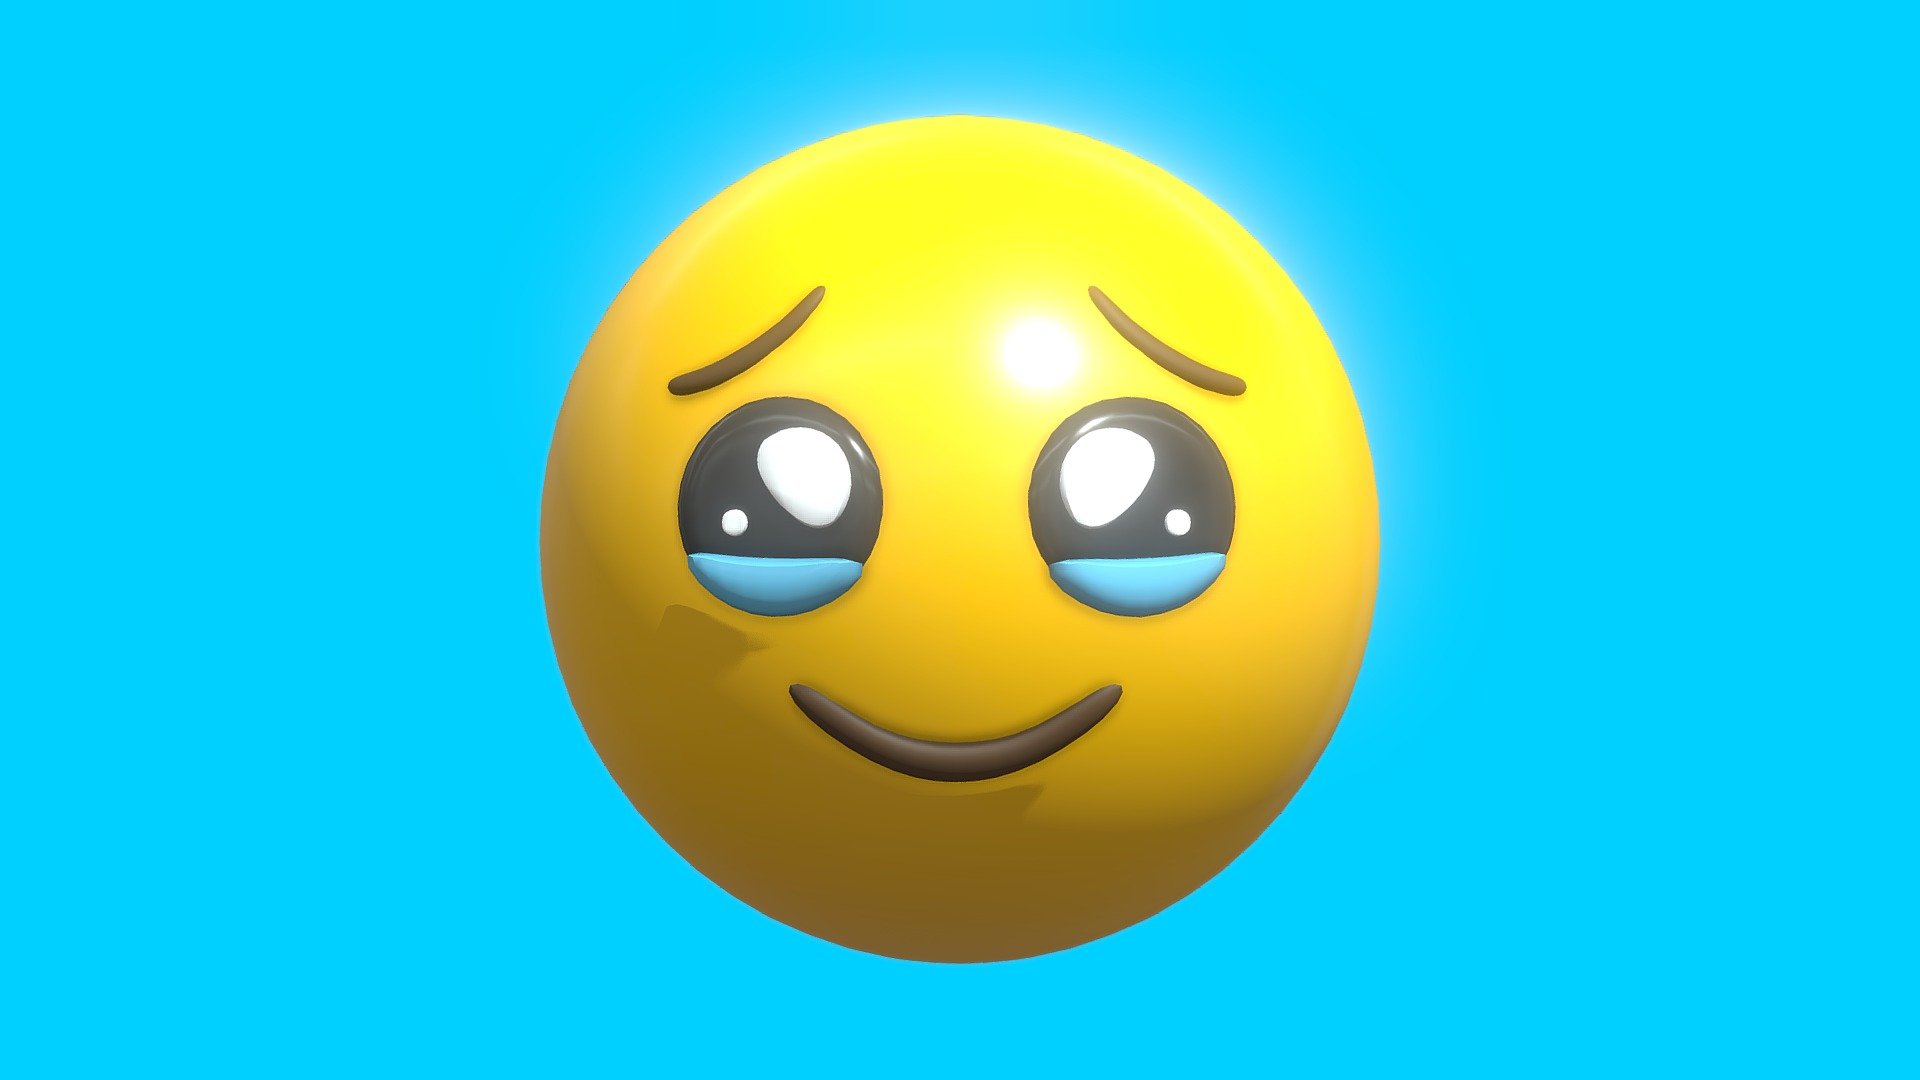 Holding Back Tears Face Emoticon Emoji or Smiley 3D Model Made in Blender 4.0

This model does include a TEXTURE, DIFFUSE, and ROUGHNESS MAP, but if you want to change the color you can change it in the blend file, just use the principled bsdf and play with the rough and base color parameter

in the blender file i just included the Model with the Subdivide Modifier and Base Material but Different UV Map - Holding Back Tears Face Emoticon Emoji or Smiley - Buy Royalty Free 3D model by pakyucangkun 3d model